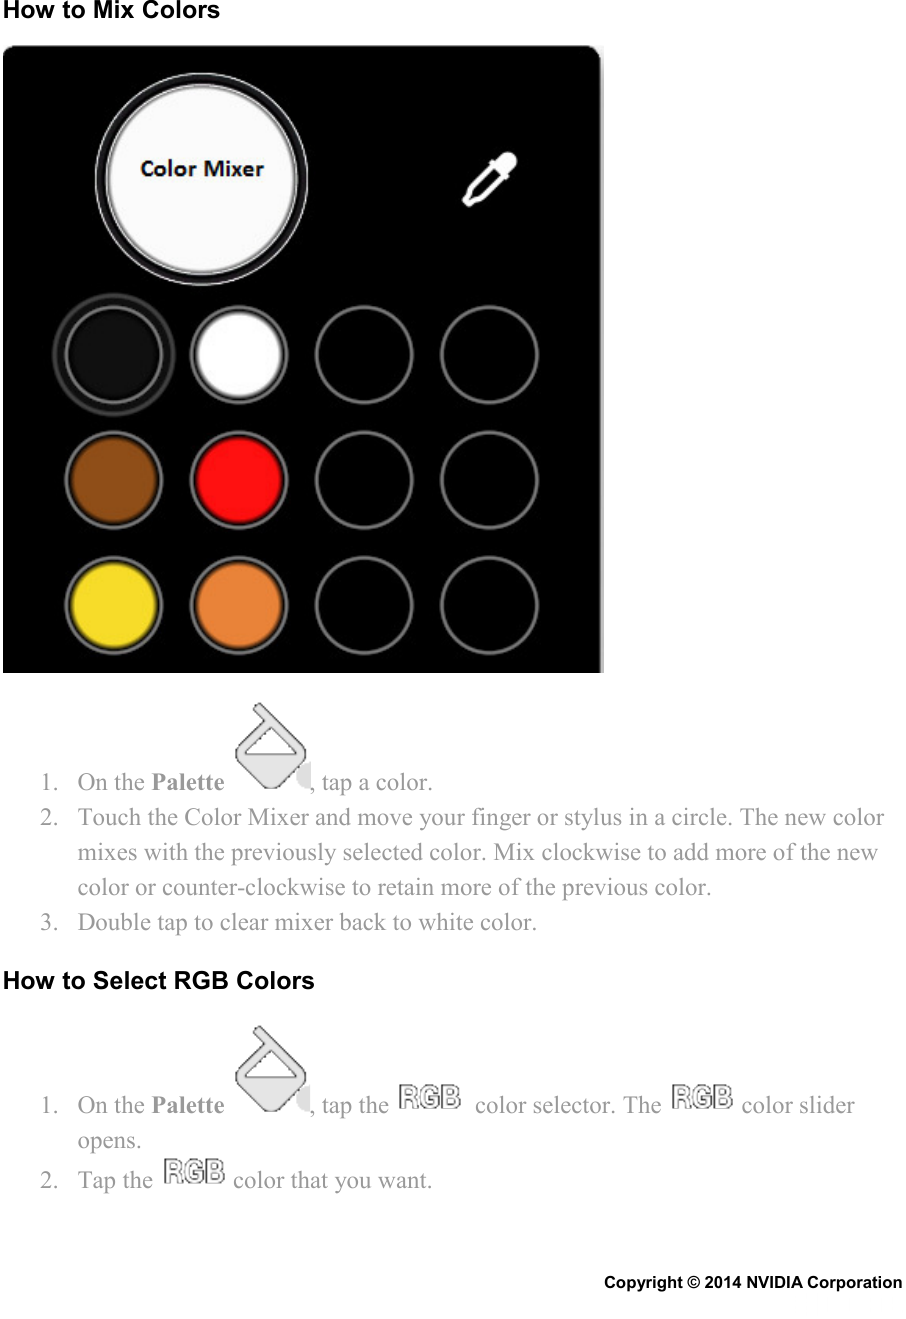   How to Mix Colors  1. On the Palette  , tap a color. 2. Touch the Color Mixer and move your finger or stylus in a circle. The new color mixes with the previously selected color. Mix clockwise to add more of the new color or counter-clockwise to retain more of the previous color. 3. Double tap to clear mixer back to white color. How to Select RGB Colors 1. On the Palette  , tap the    color selector. The   color slider opens. 2. Tap the   color that you want. Copyright © 2014 NVIDIA Corporation   